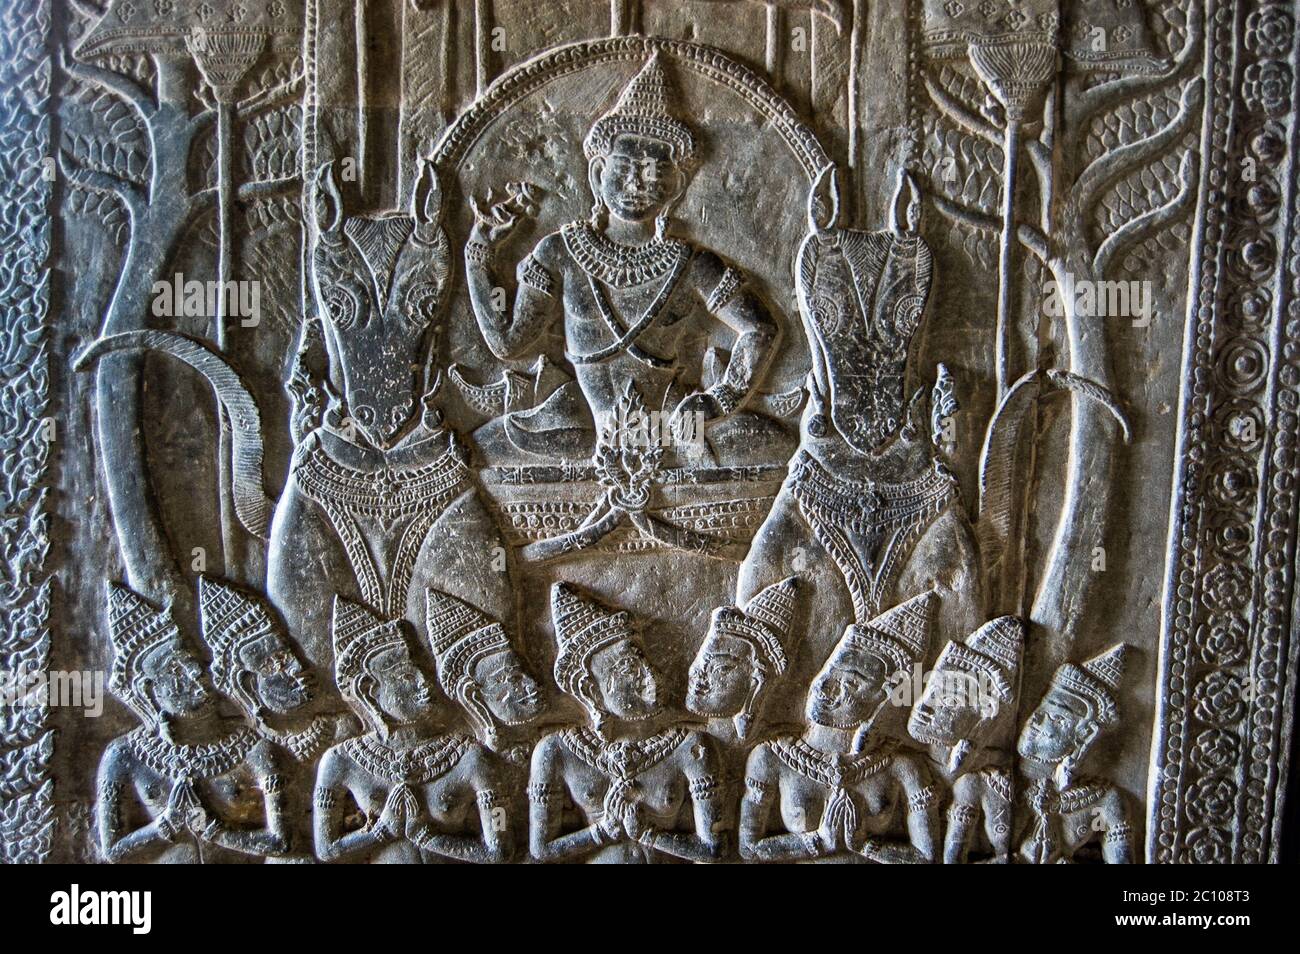 Ancient Khmer bas relief carving showing the Hindu god Vishnu riding on a chariot pulled by a pair of horses. Angkor Wat temple, Siem Reap, Cambodia. Stock Photo